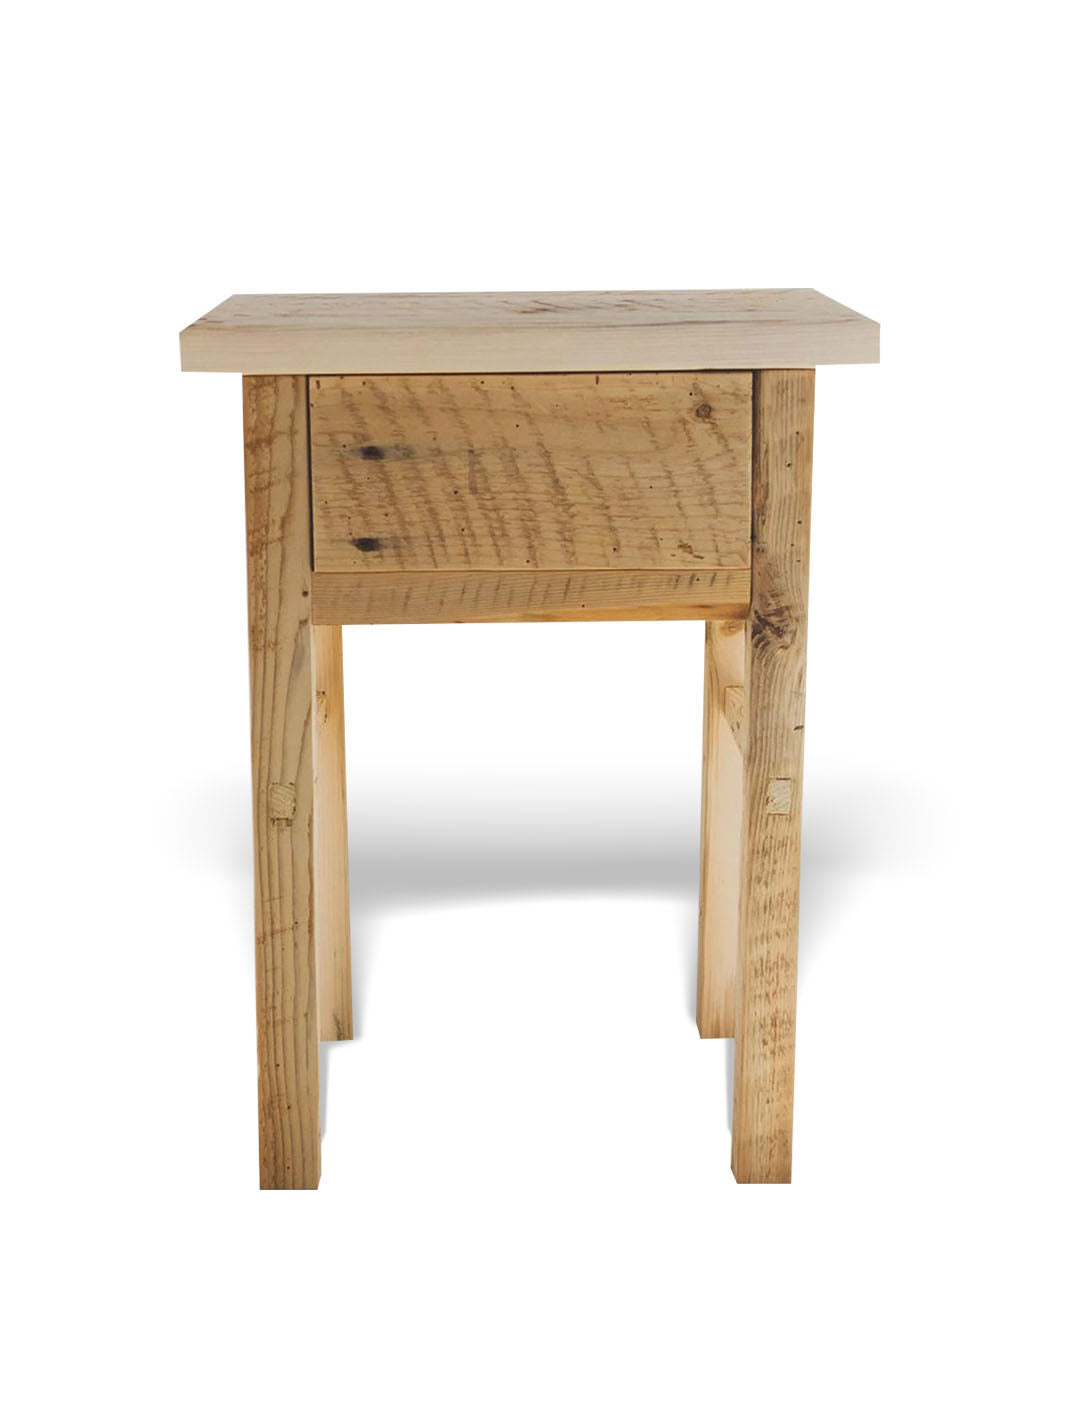 Handcrafted Authentic Reclaimed Barnwood Bedside Table | Salvaged Wood From Prince Edward Island, CA FTN  FTN0051